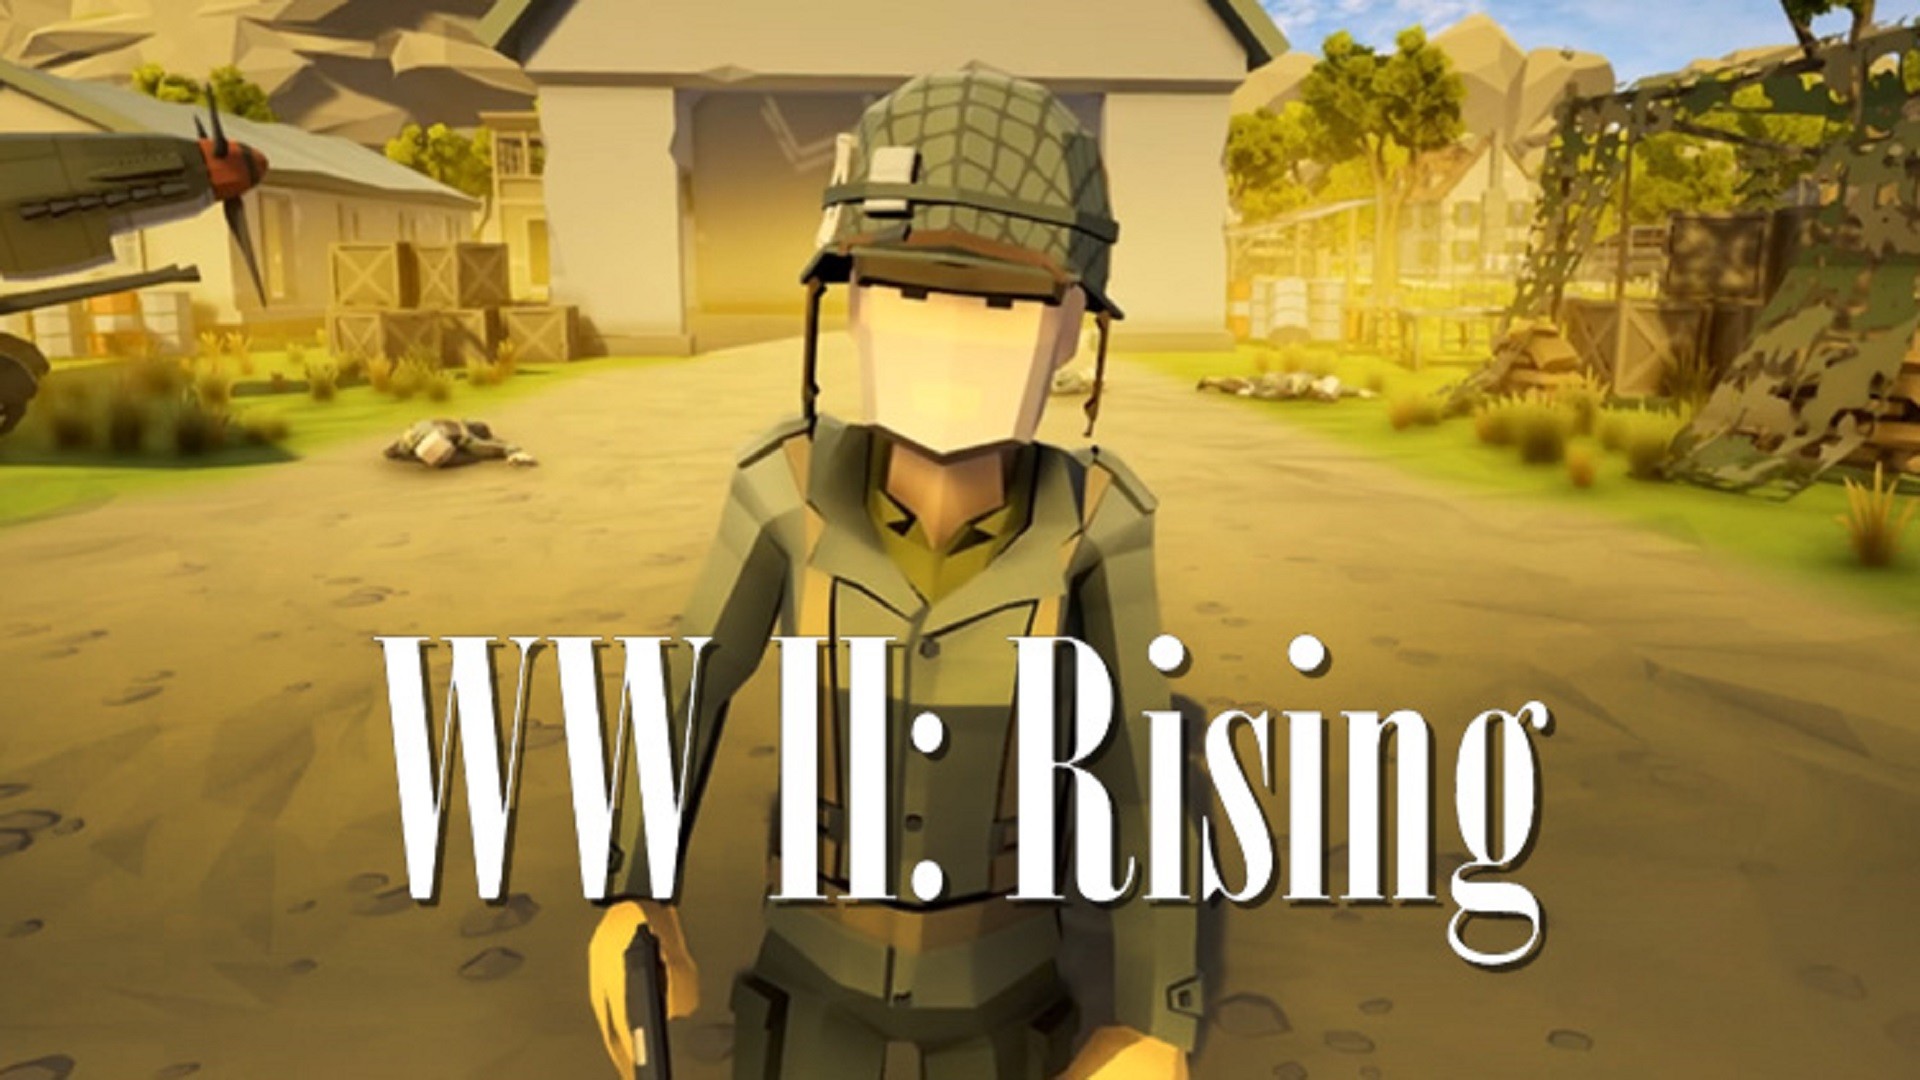 WWII: Rising